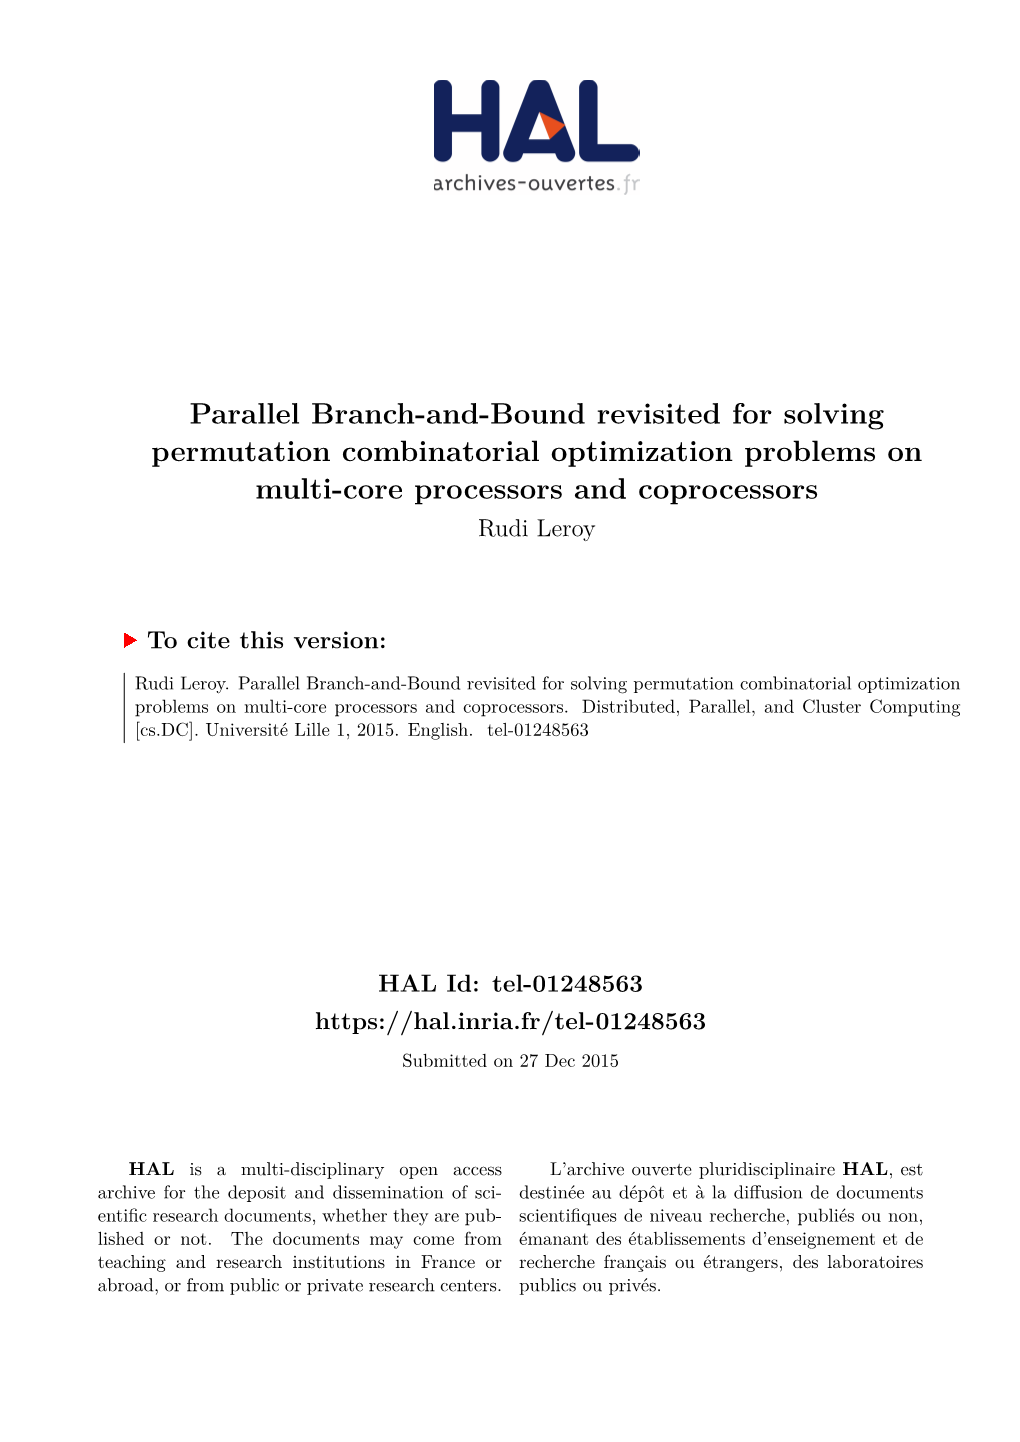 Parallel Branch-And-Bound Revisited for Solving Permutation Combinatorial Optimization Problems on Multi-Core Processors and Coprocessors Rudi Leroy